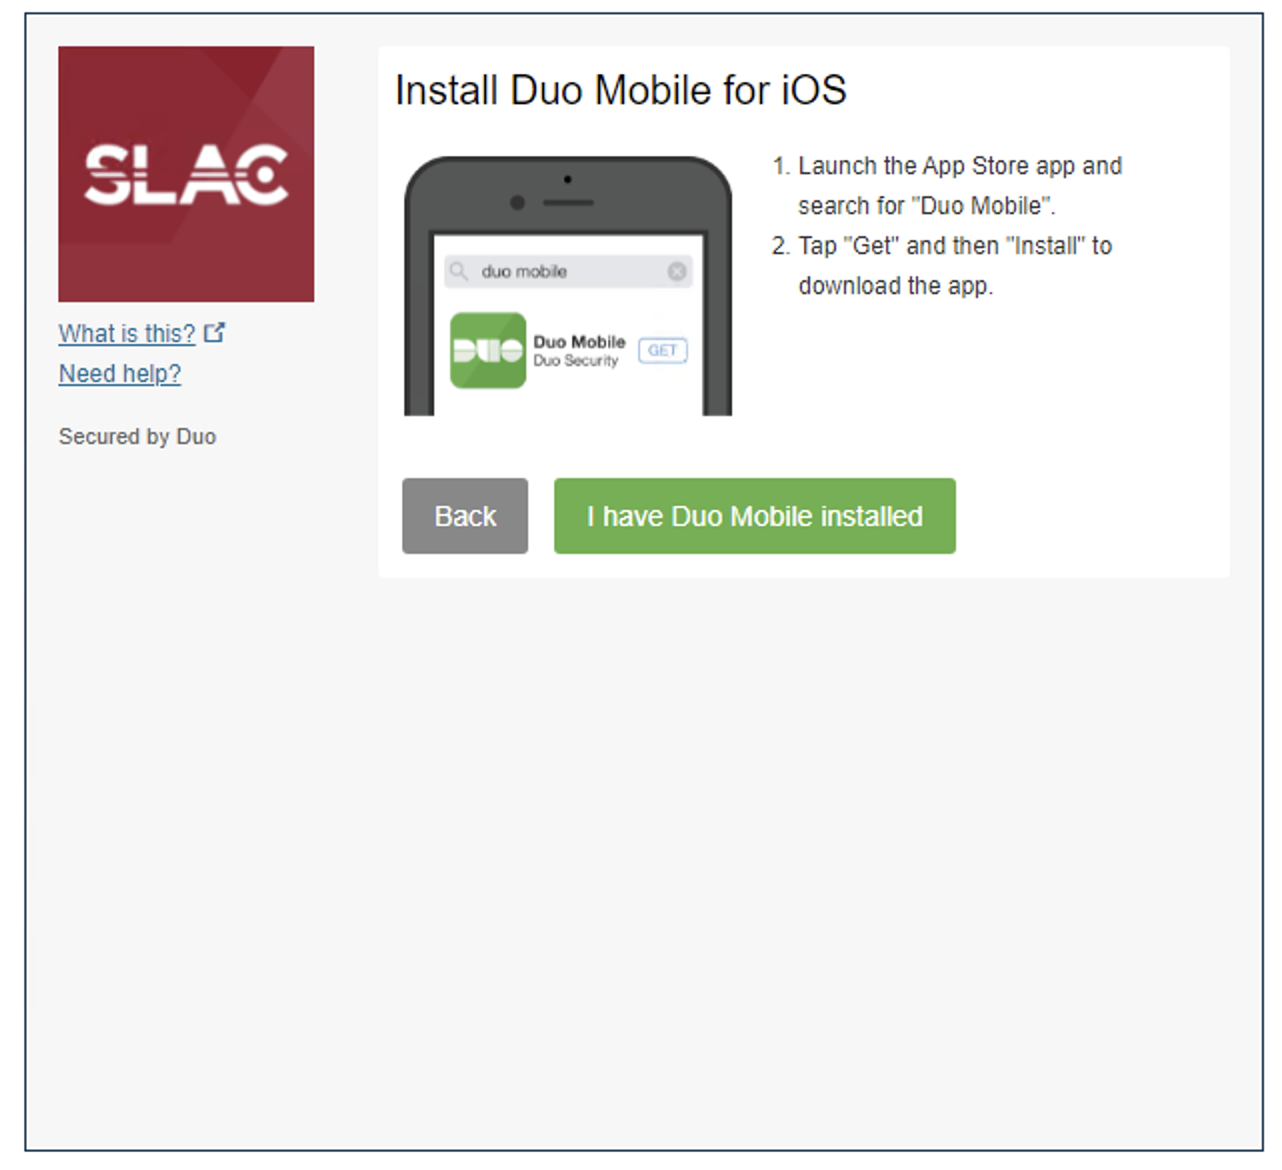 Screenshot of the Duo screen titled "Install Duo Mobile for iOS""